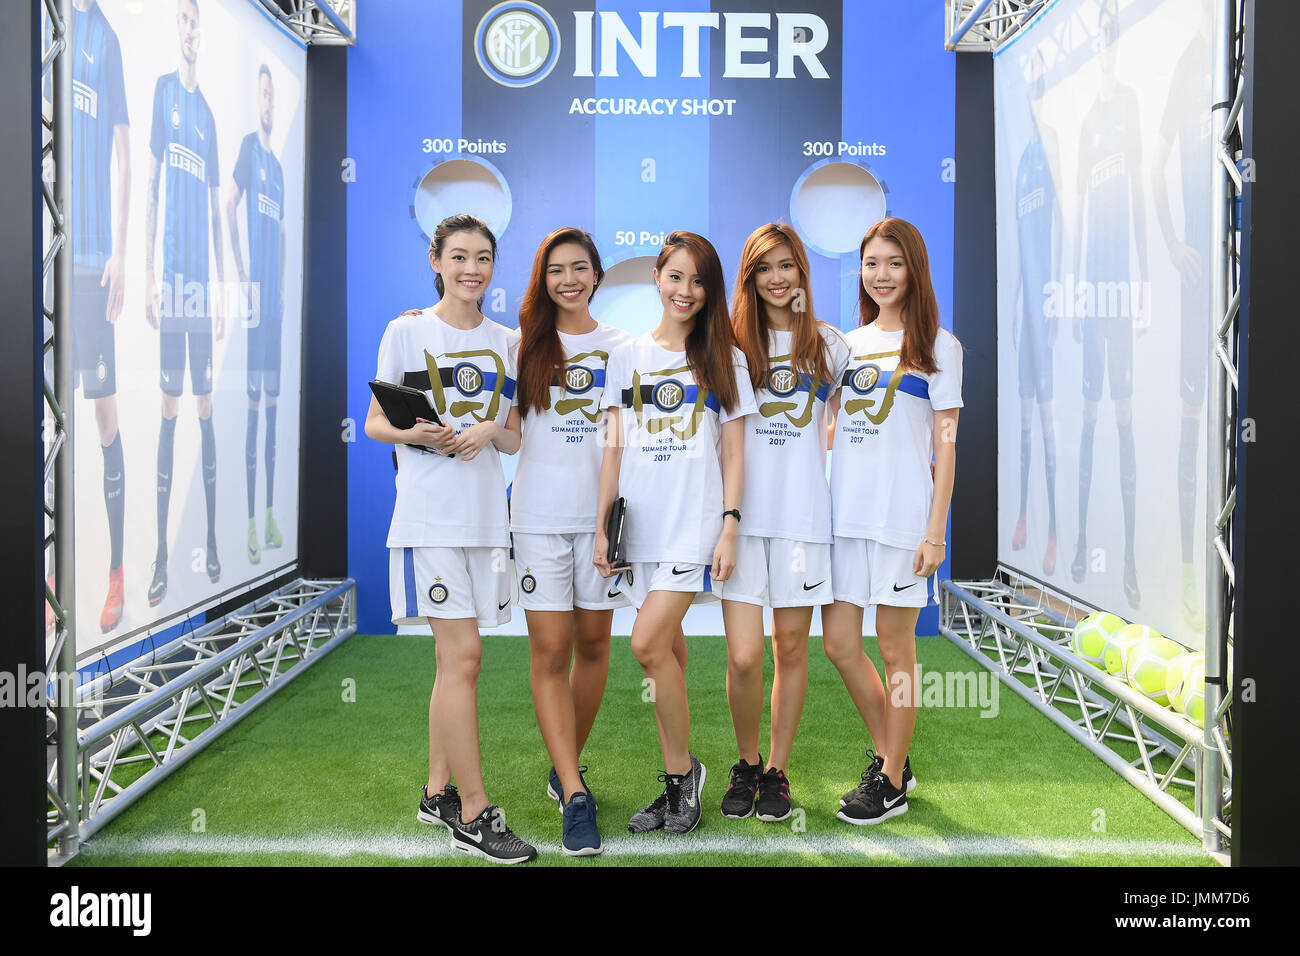 Singapore. 27th July, 2017. Supporter girls at Inter Milan event booth,  JULY 27, 2017 - Football/Soccer : International Champions Cup Singapore  match between Bayern Munich 0-2 Inter Milan at National Stadium in